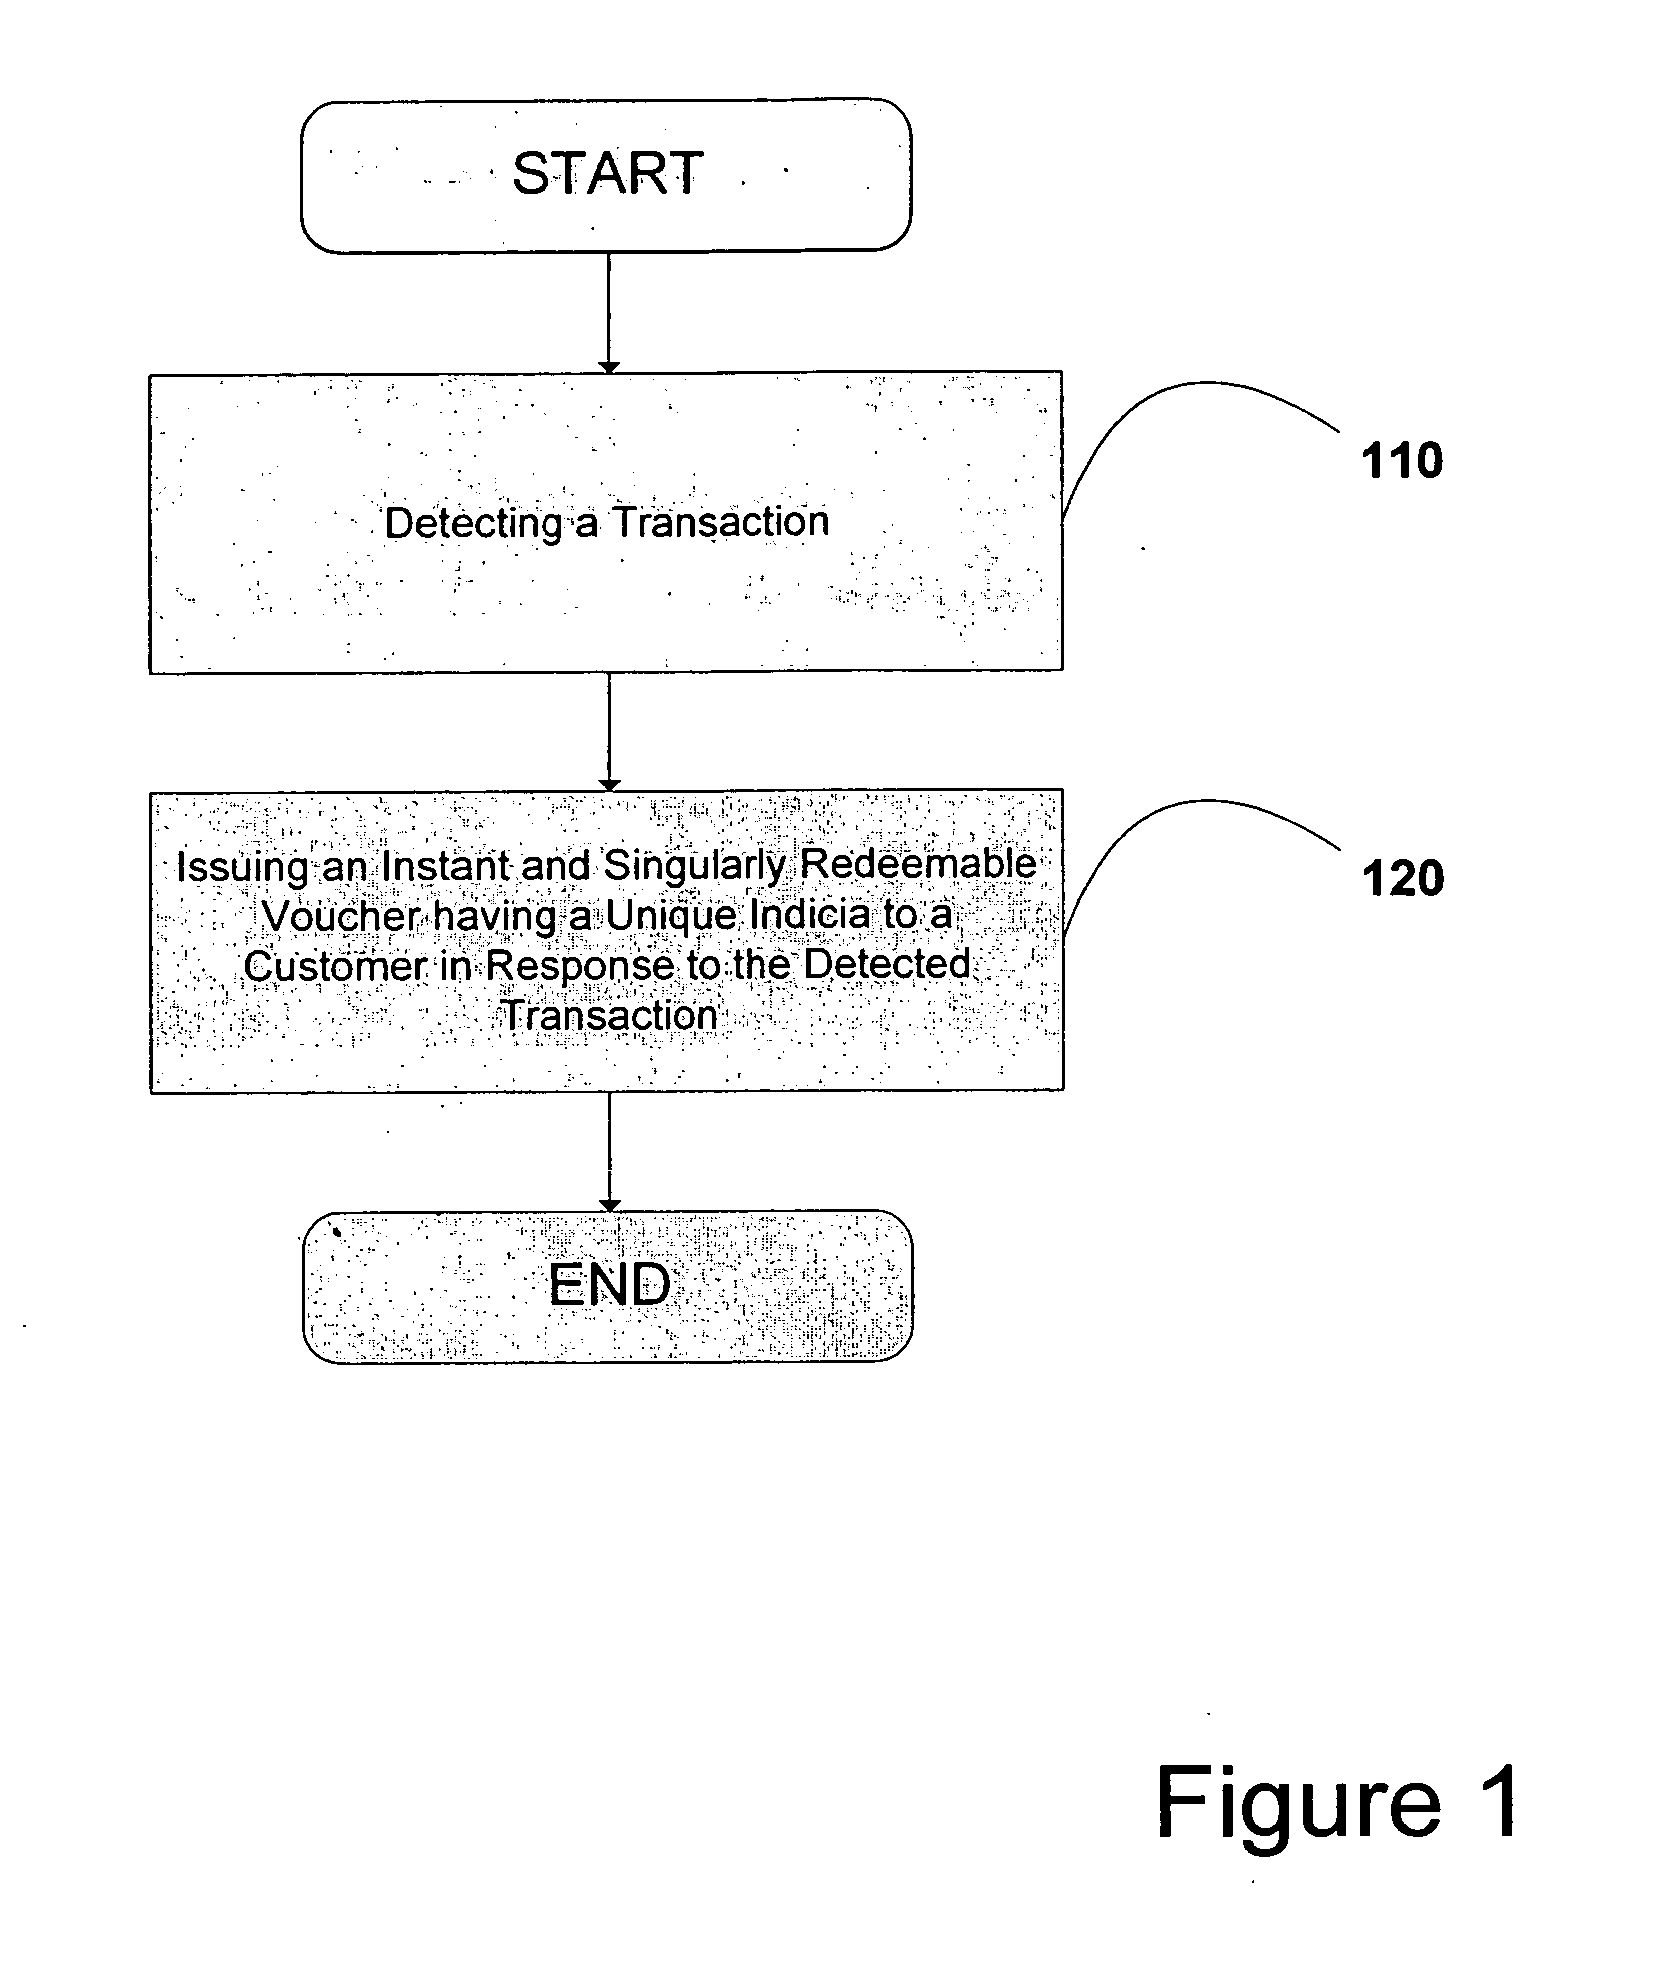 System and method for providing unique and immediately redeemable incentive vouchers to a customer to encourage transactions with a business entity